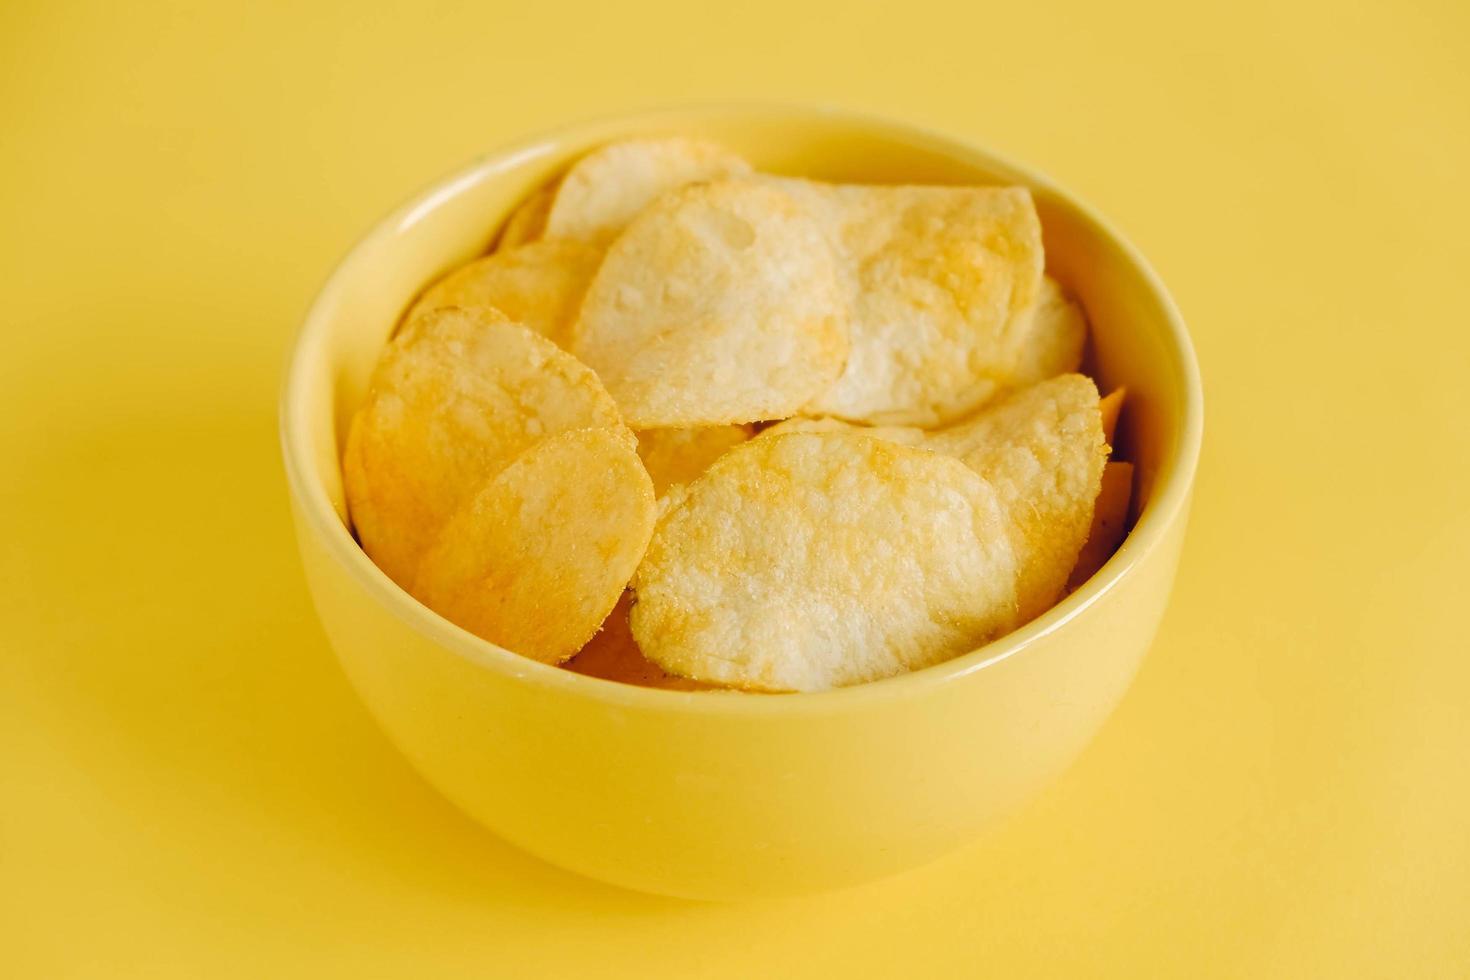 Potato chips in a yellow bowl on a yellow background photo